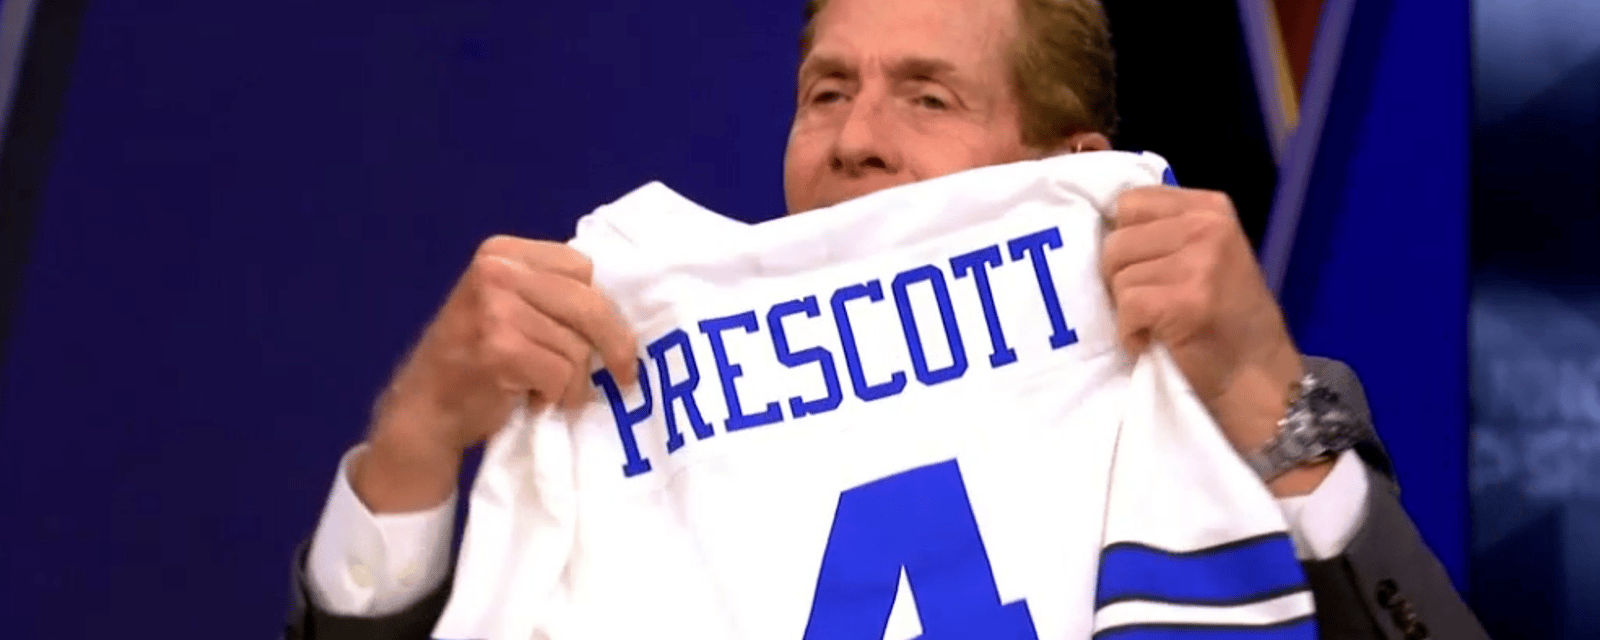 Skip Bayless insults the Dallas Cowboys over title drought